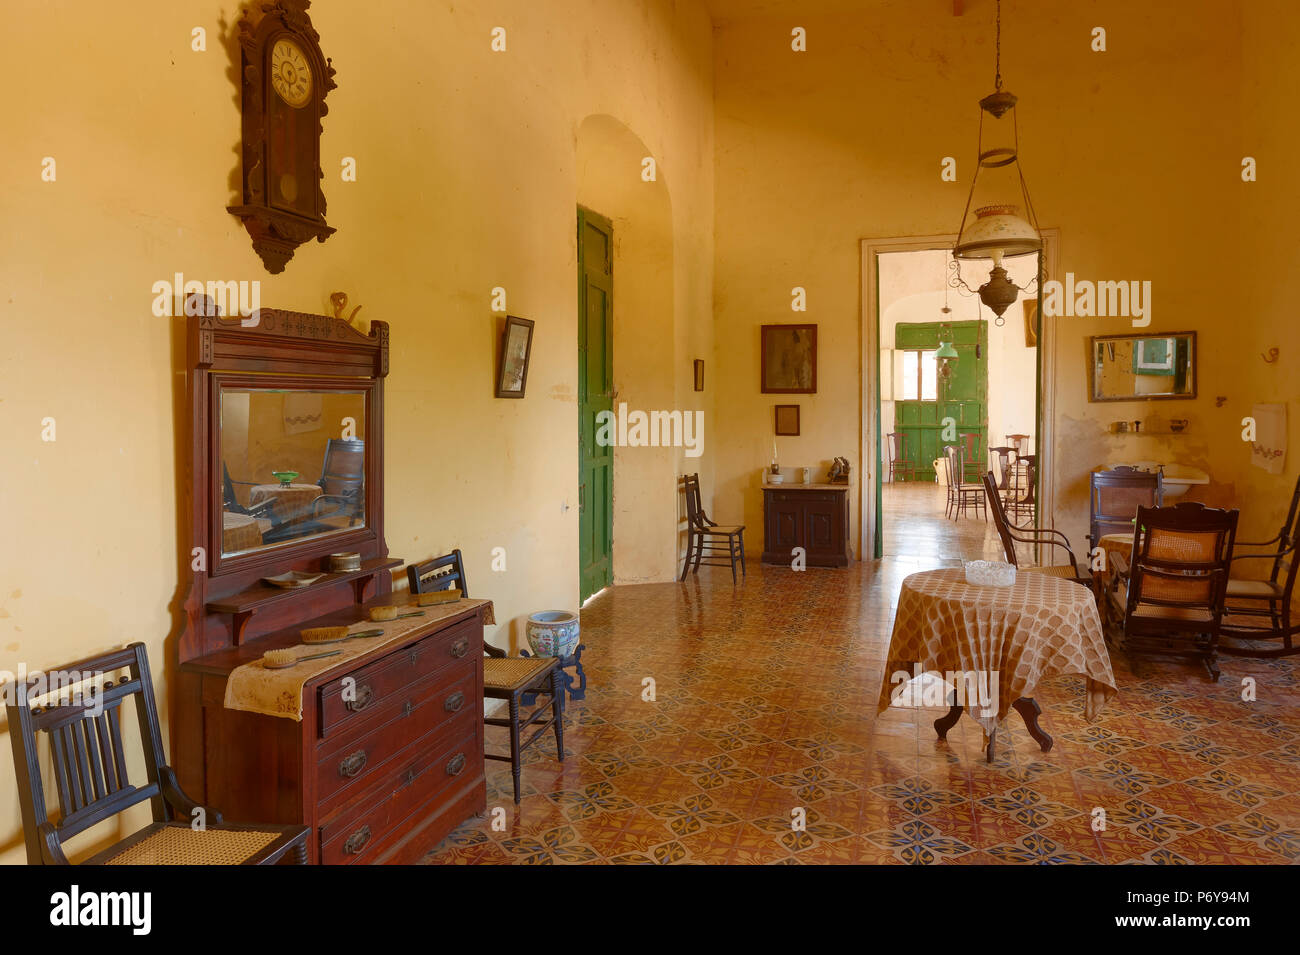 Room at Hacienda Yaxcopoil, a 17th century henequen plantation near Merida, Yucatan, Mexico, now a museum, guest house and events venue. Stock Photo